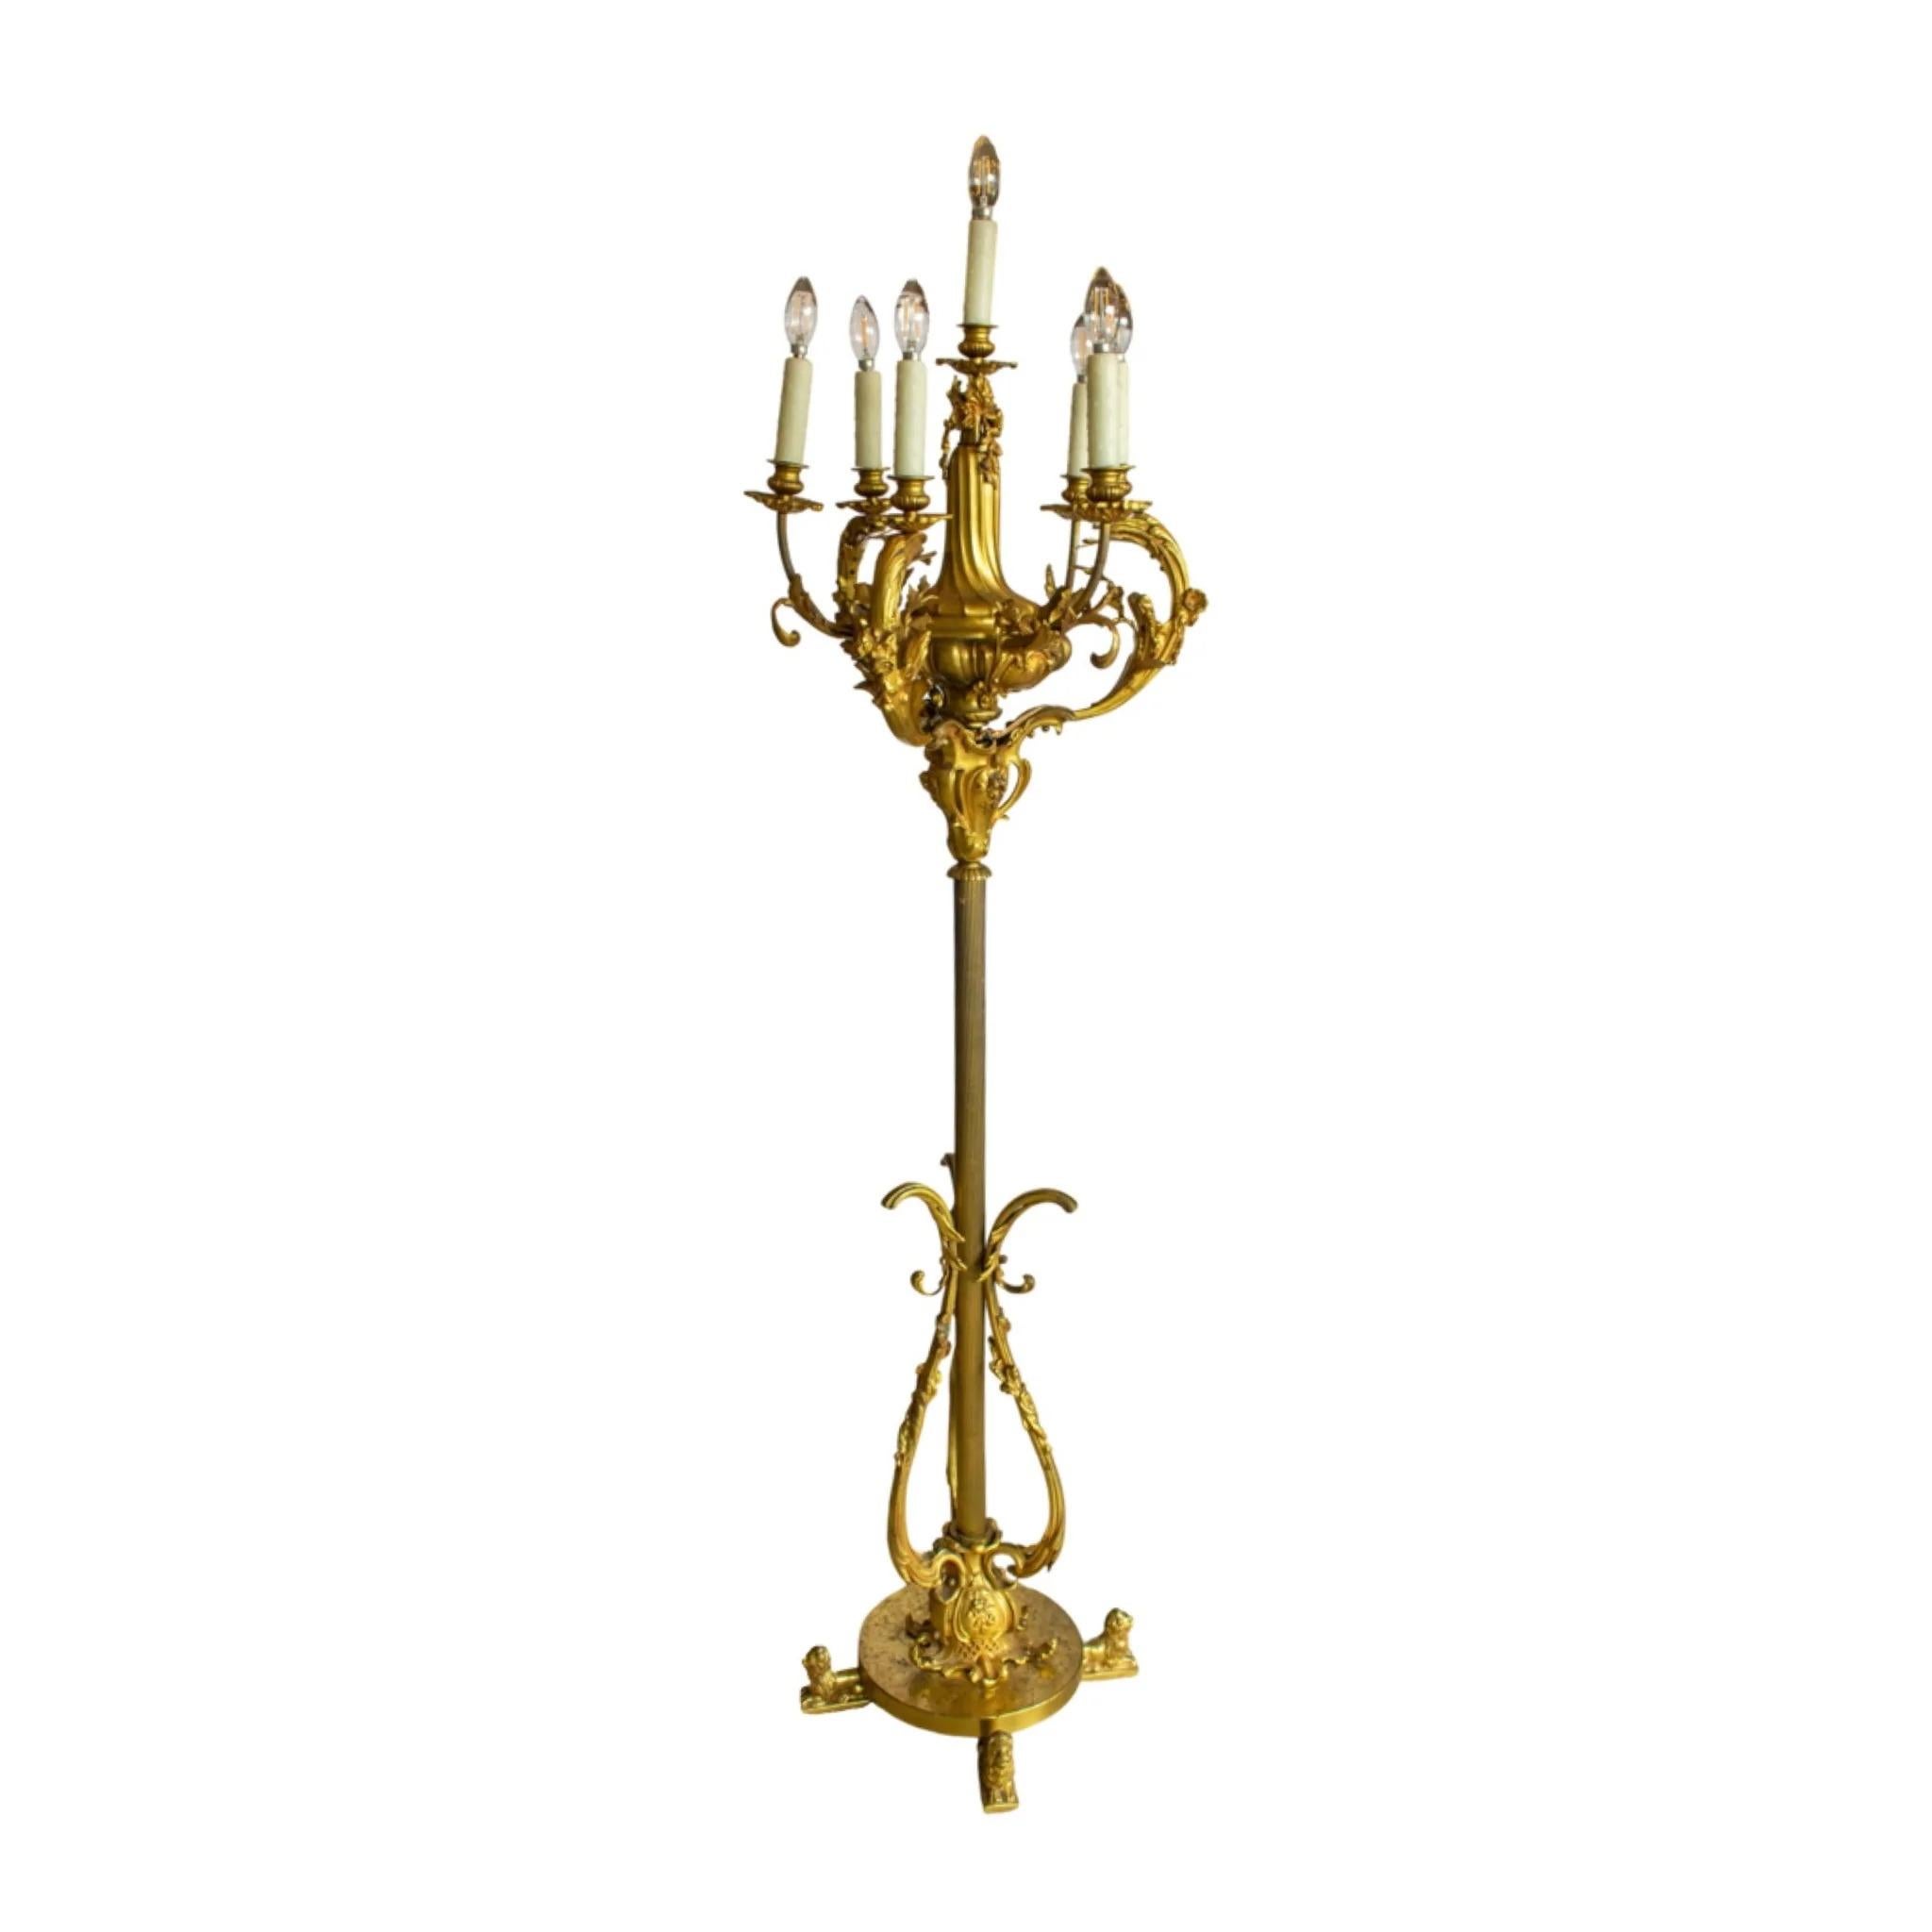 Bronze lamp with baroque style designs. US wired. Originates from France. Circa, 1900.